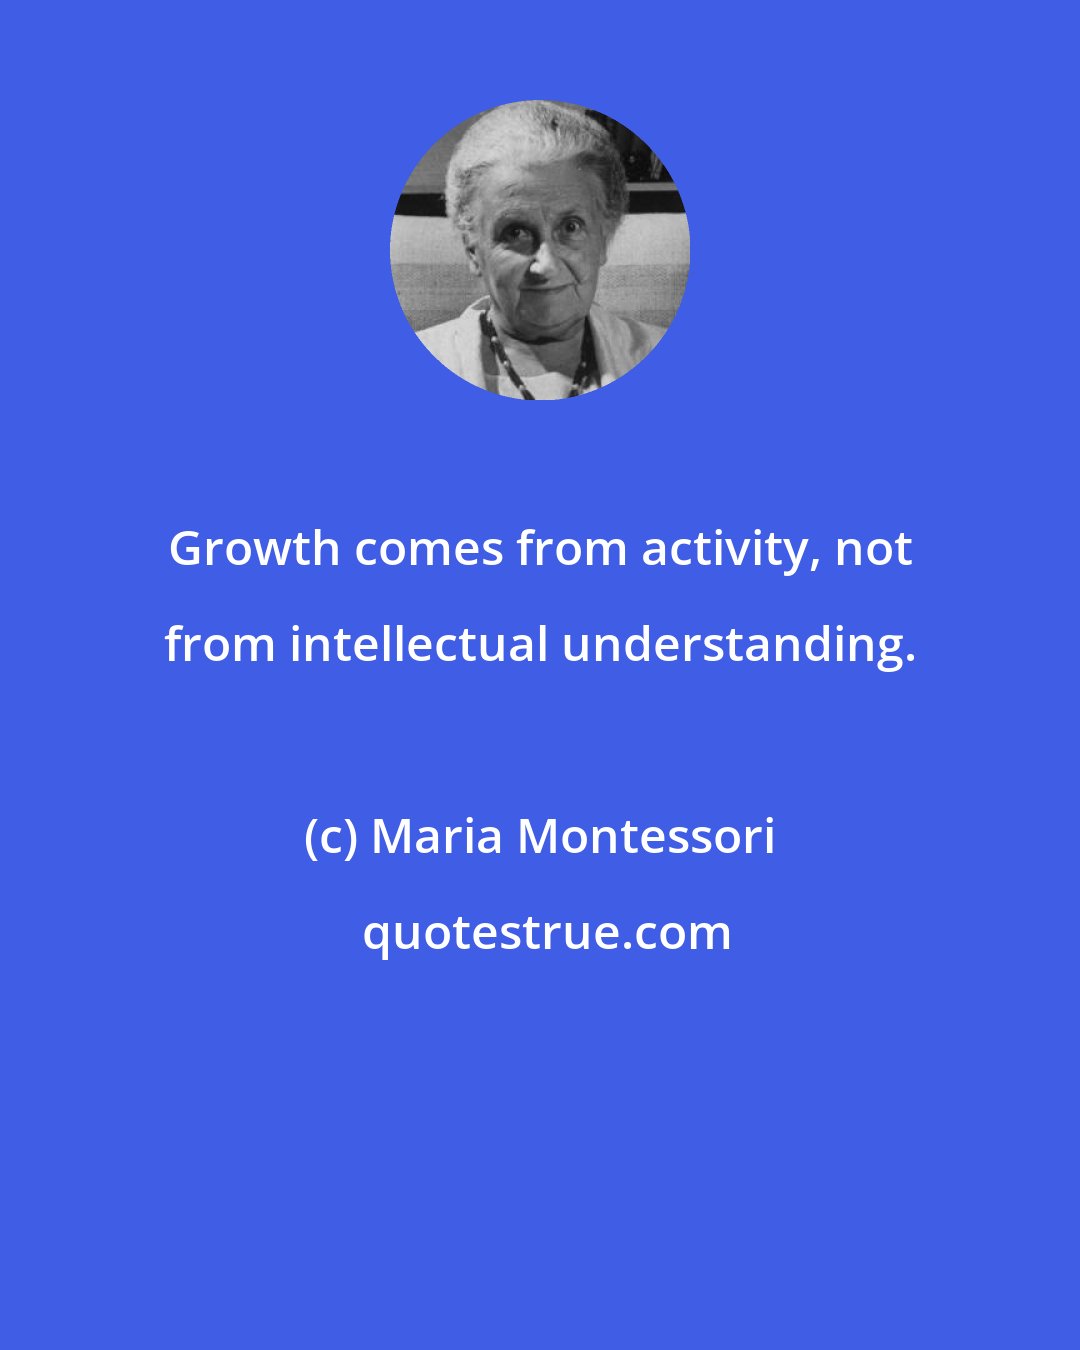 Maria Montessori: Growth comes from activity, not from intellectual understanding.